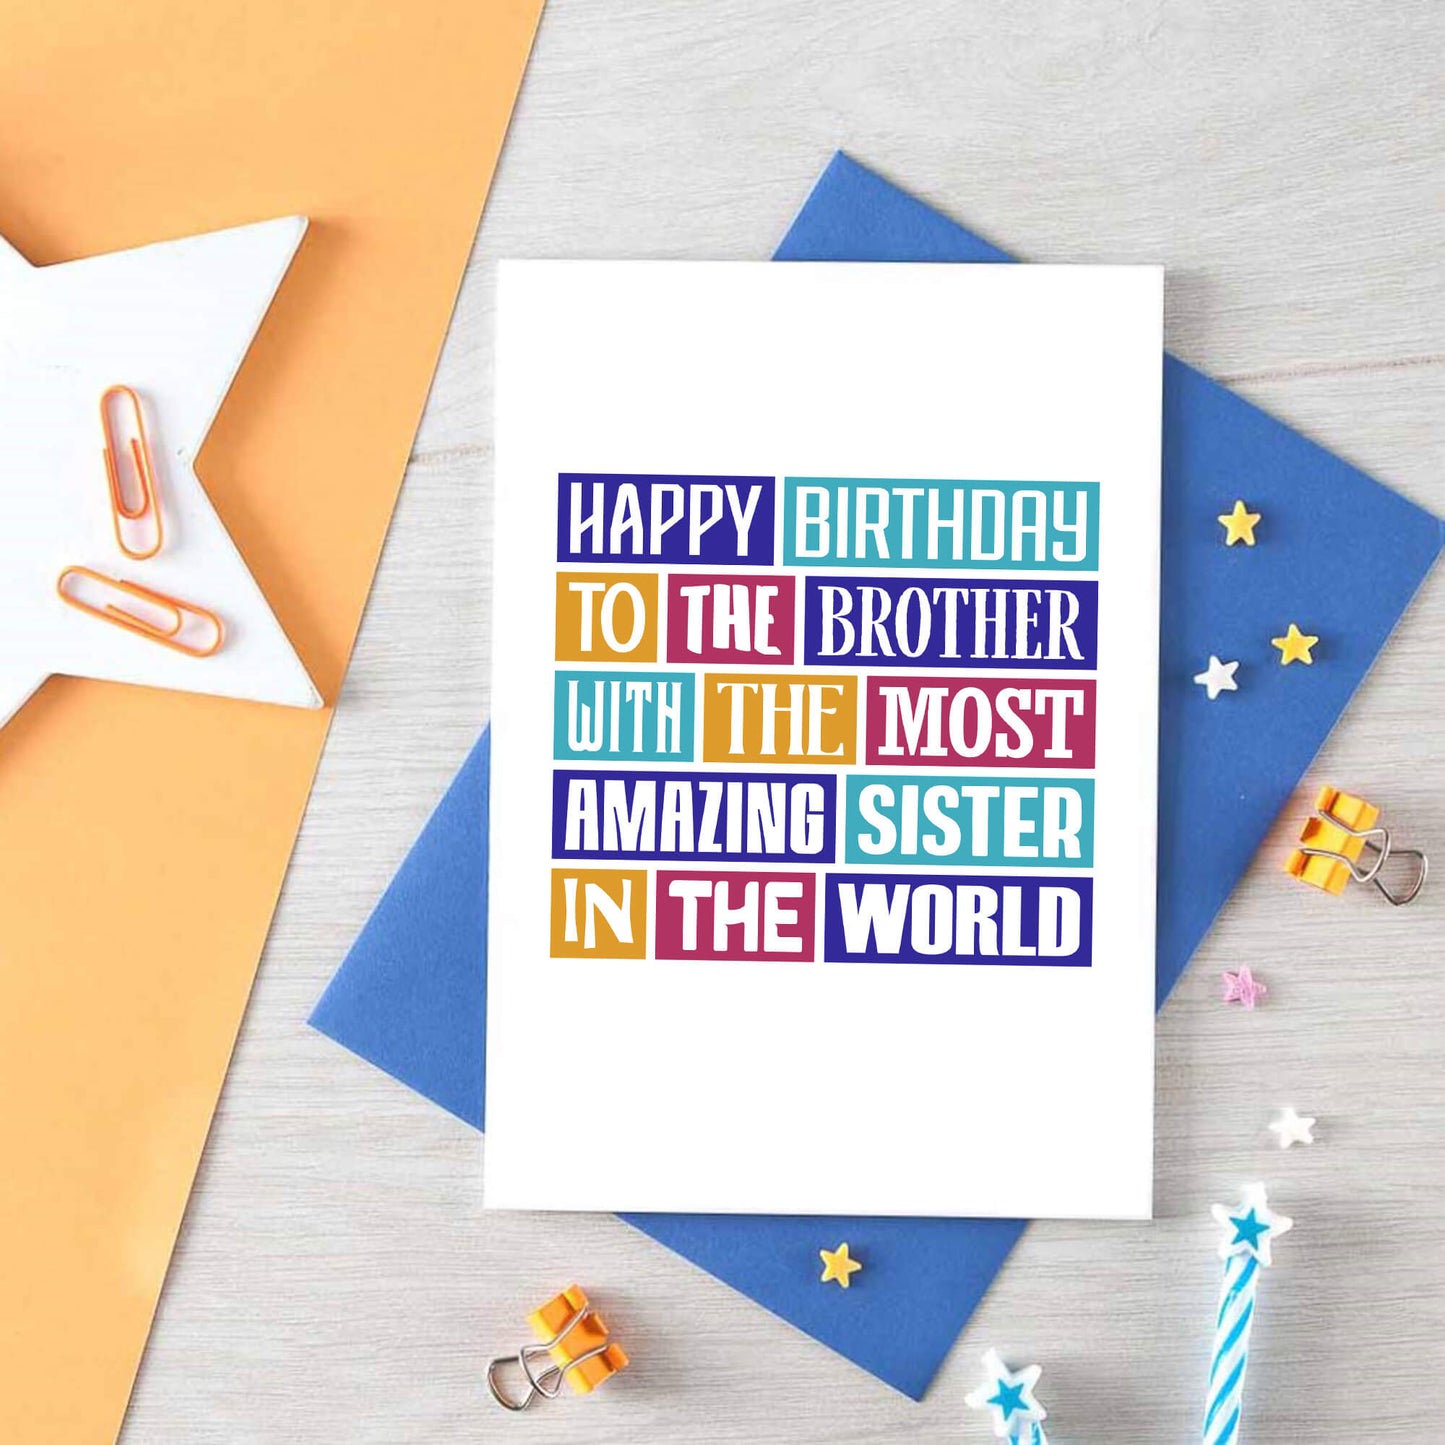 Brother Birthday Card by SixElevenCreations. Reads Happy birthday to the brother with the most amazing sister in the world. Product Code SE0145A6